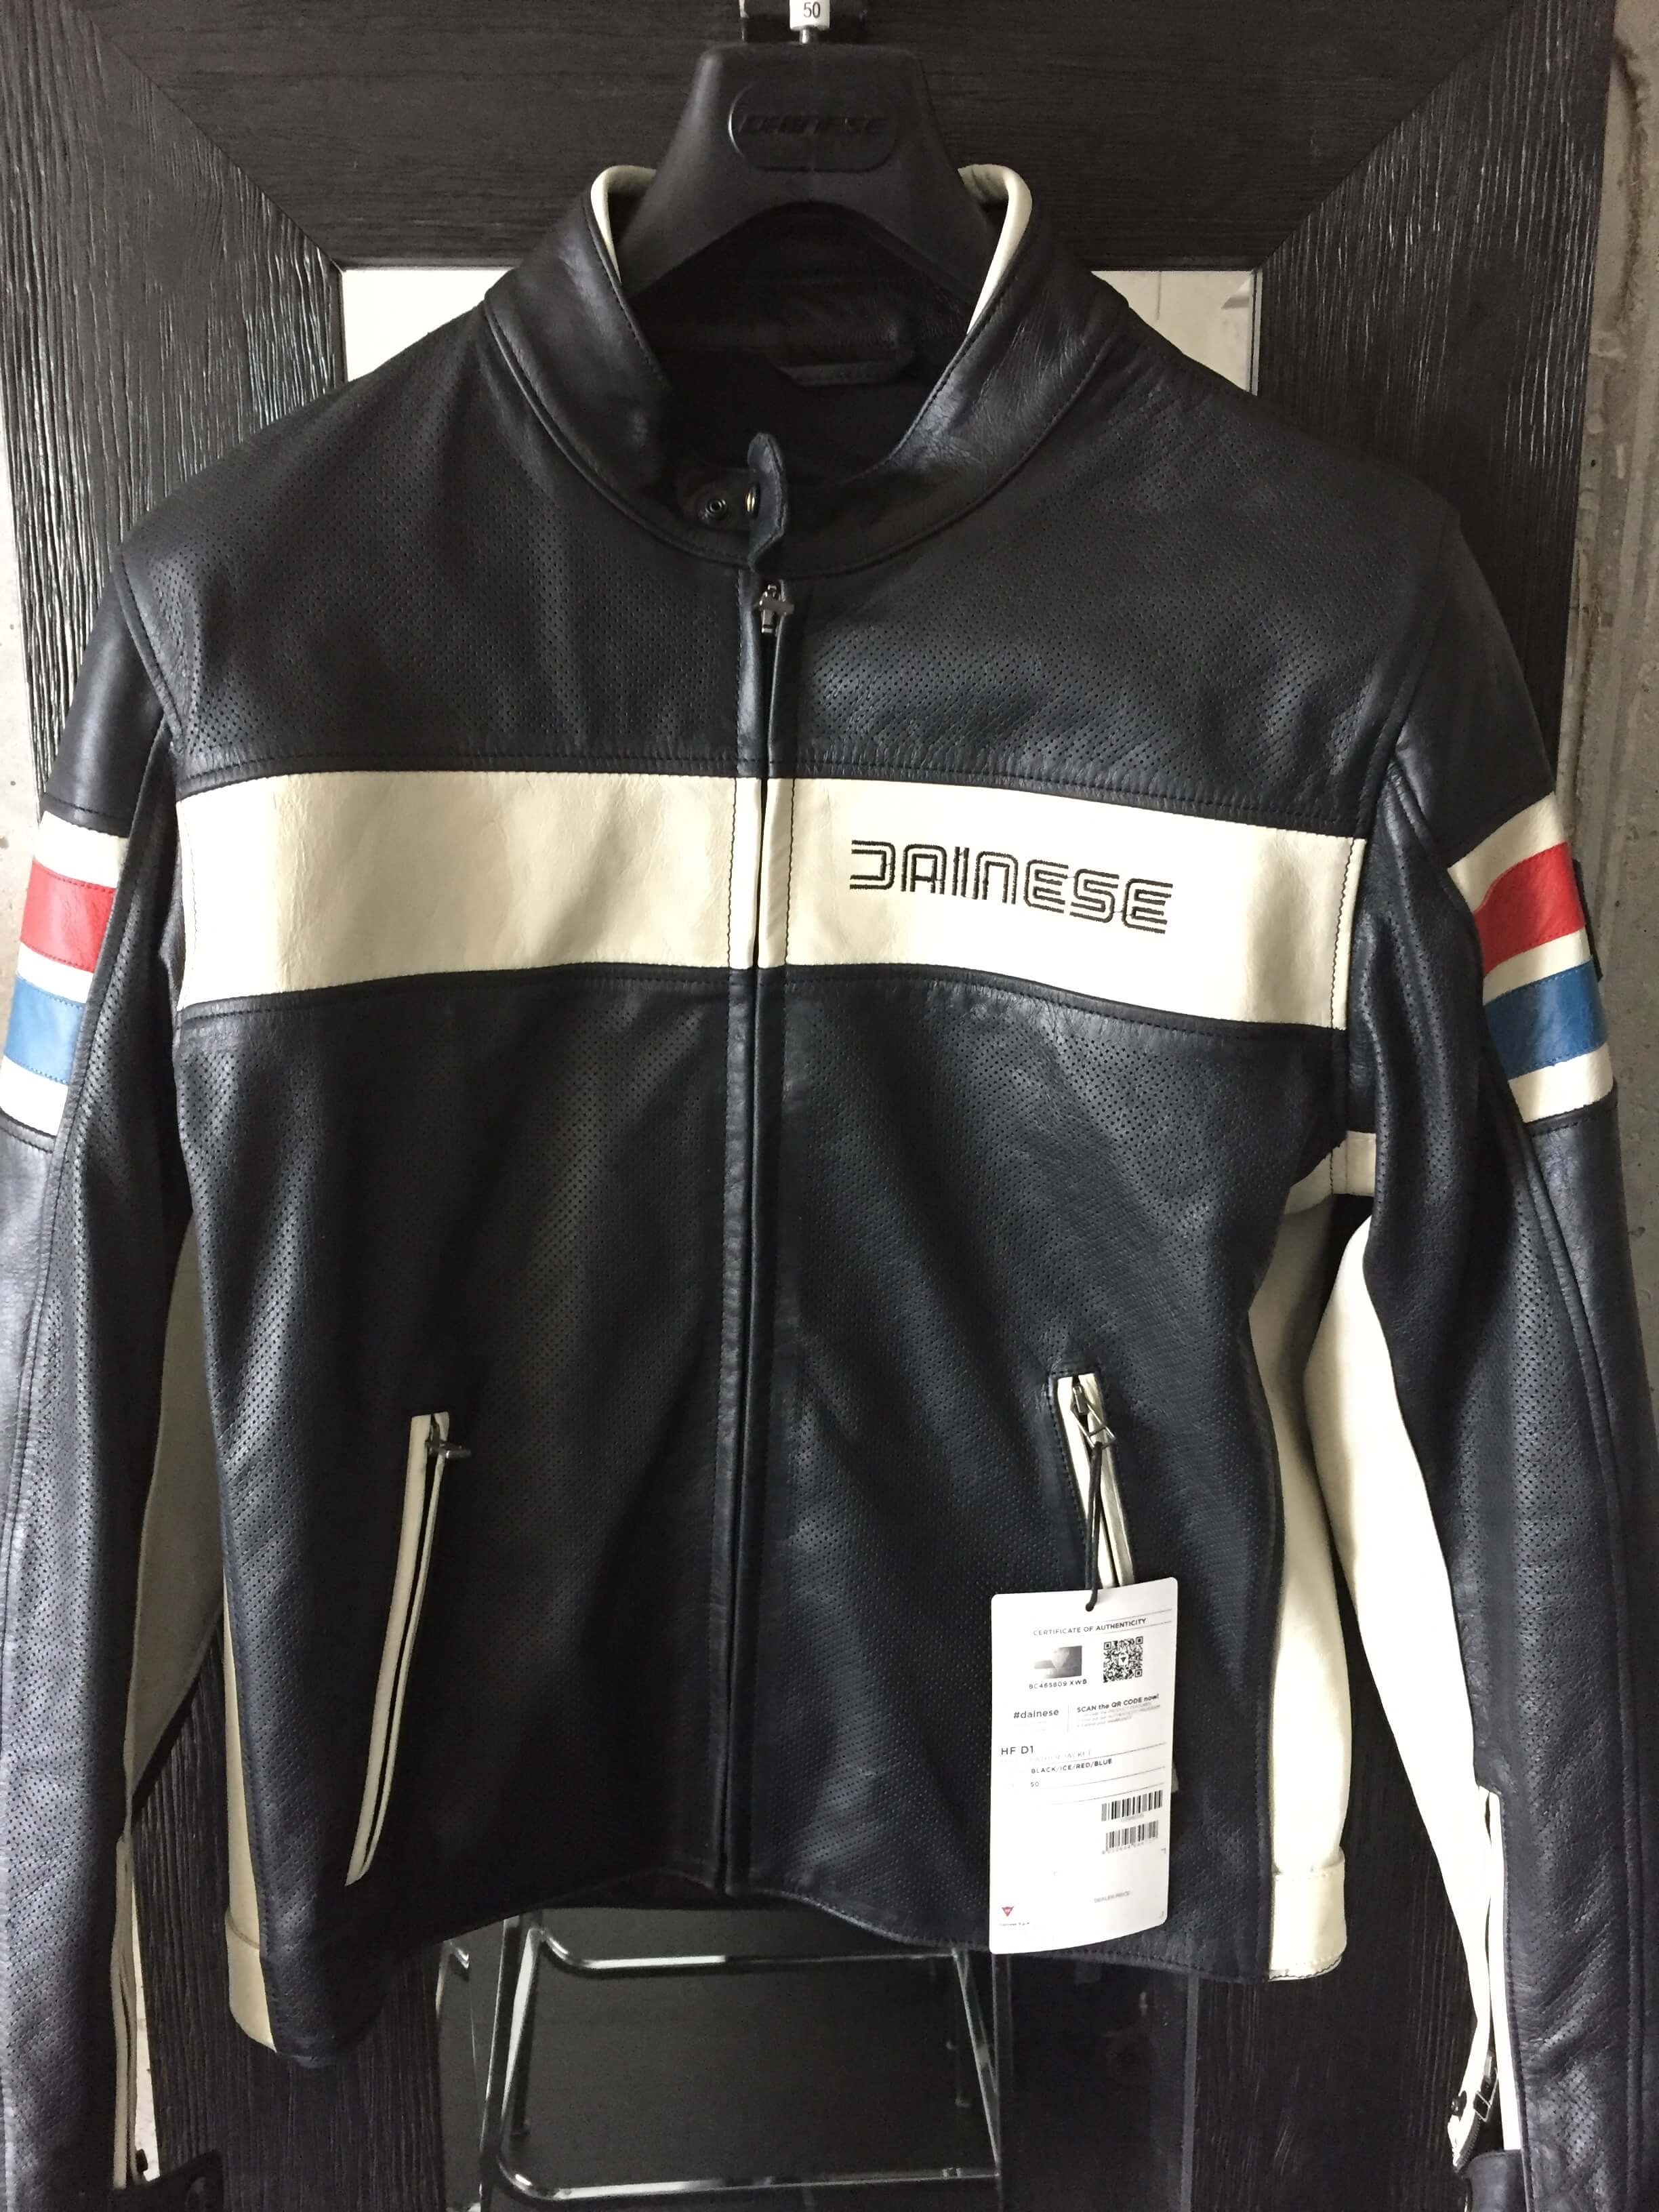 Dainese HF D1 Leather Motorcycle Jacket | GTAMotorcycle.com